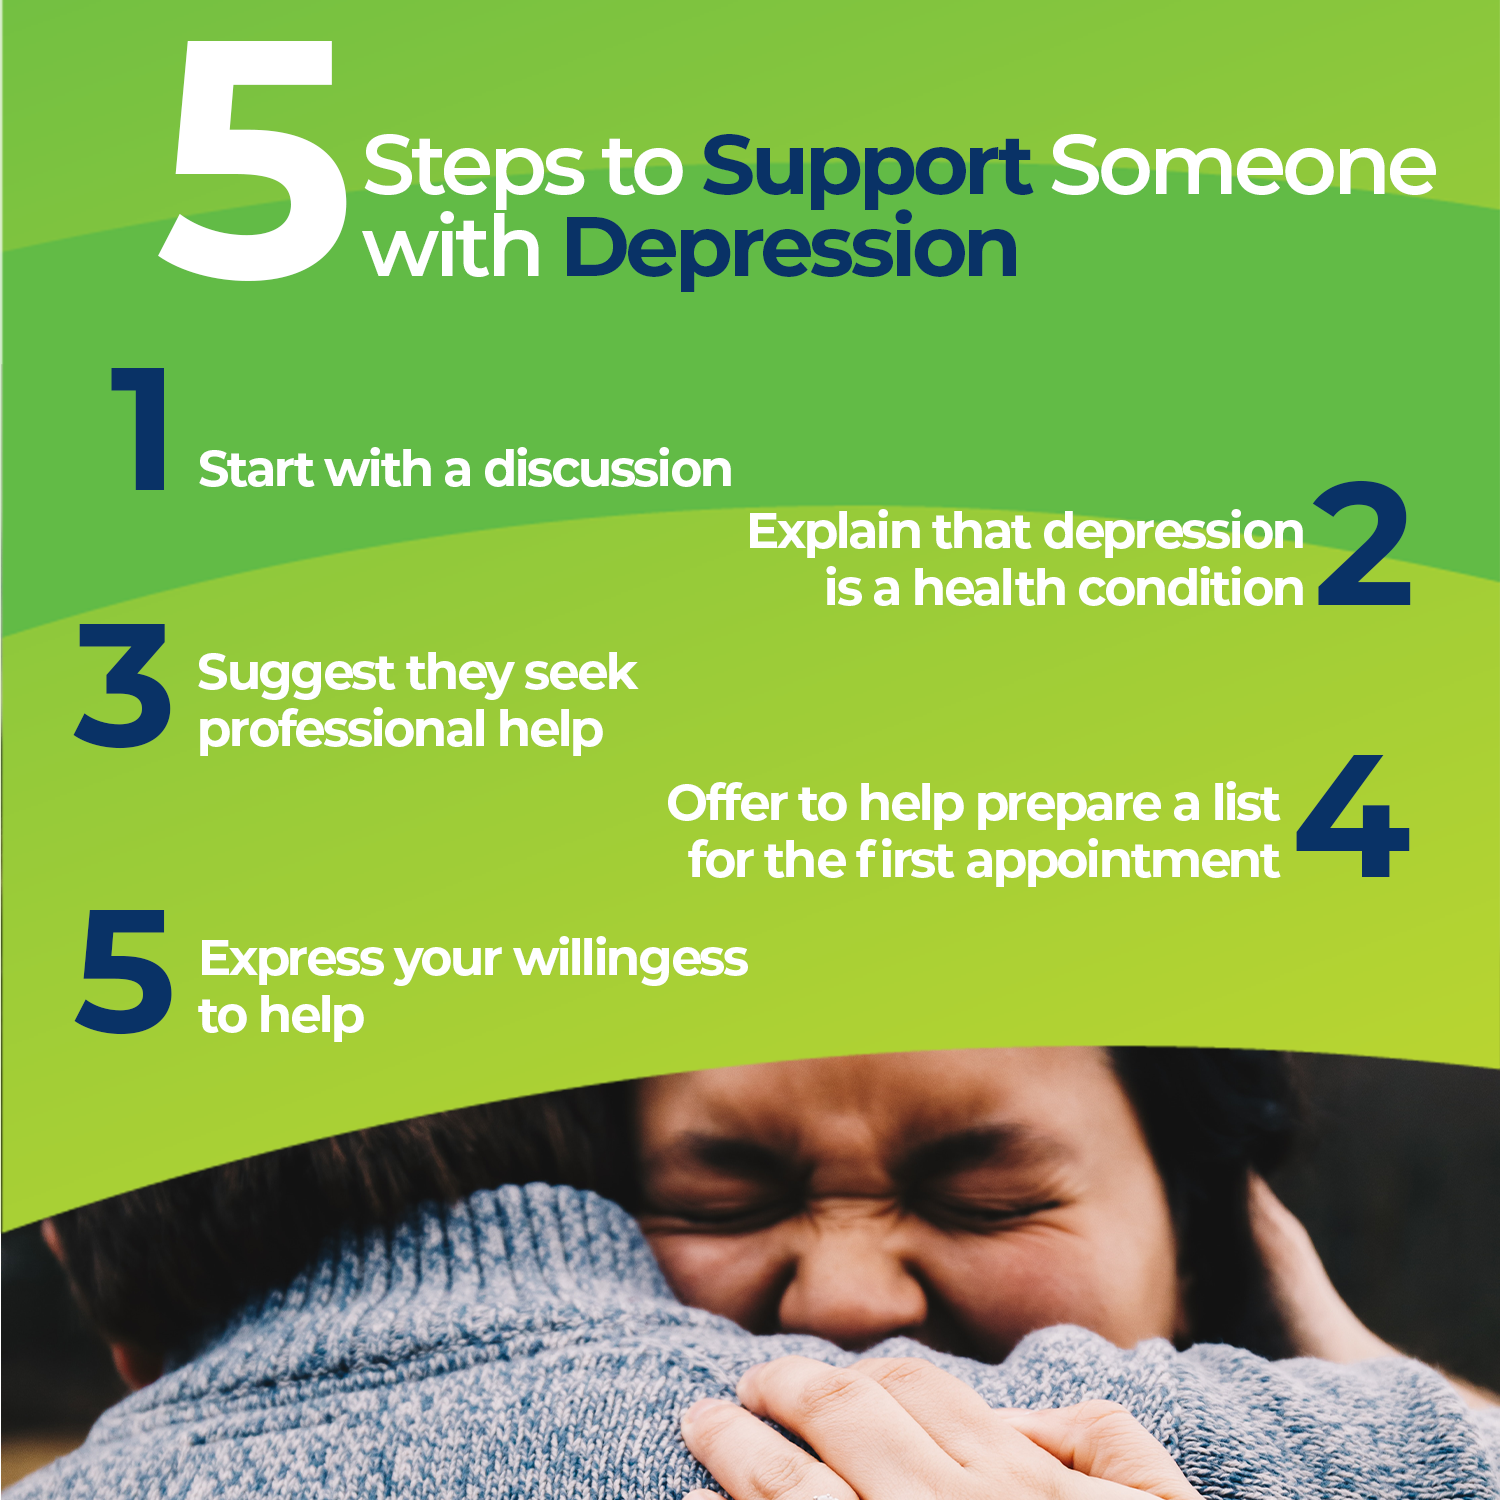 5 Steps to support someone with depression